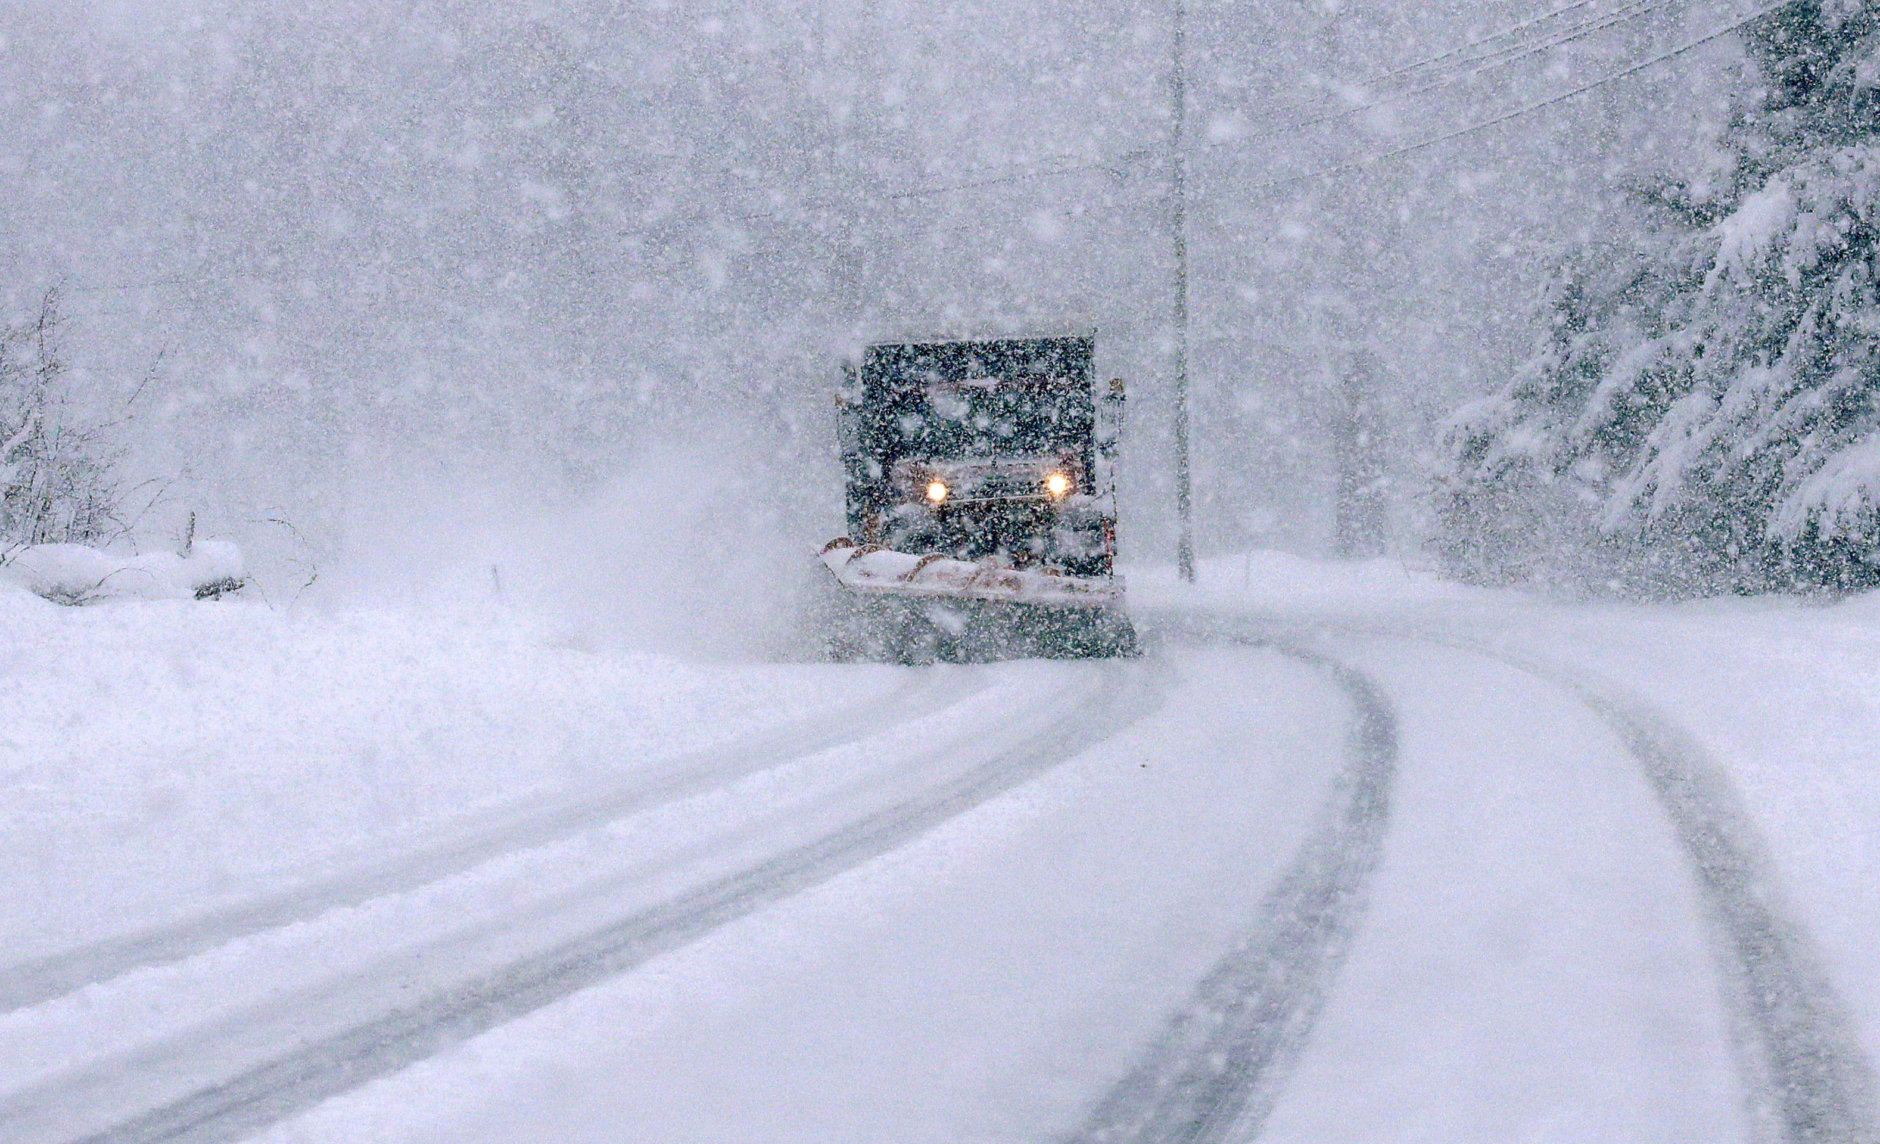 As heavy snow falsl, a plow truck clears Route 102 during a winter storm in Chester, N.H., Tuesday, March 13, 2018. The nor'easter is expected to deliver up to 2 feet of snow to some areas of New England, bringing blizzard conditions to parts of coastal Massachusetts and covering highways with snow. (AP Photo/Charles Krupa)